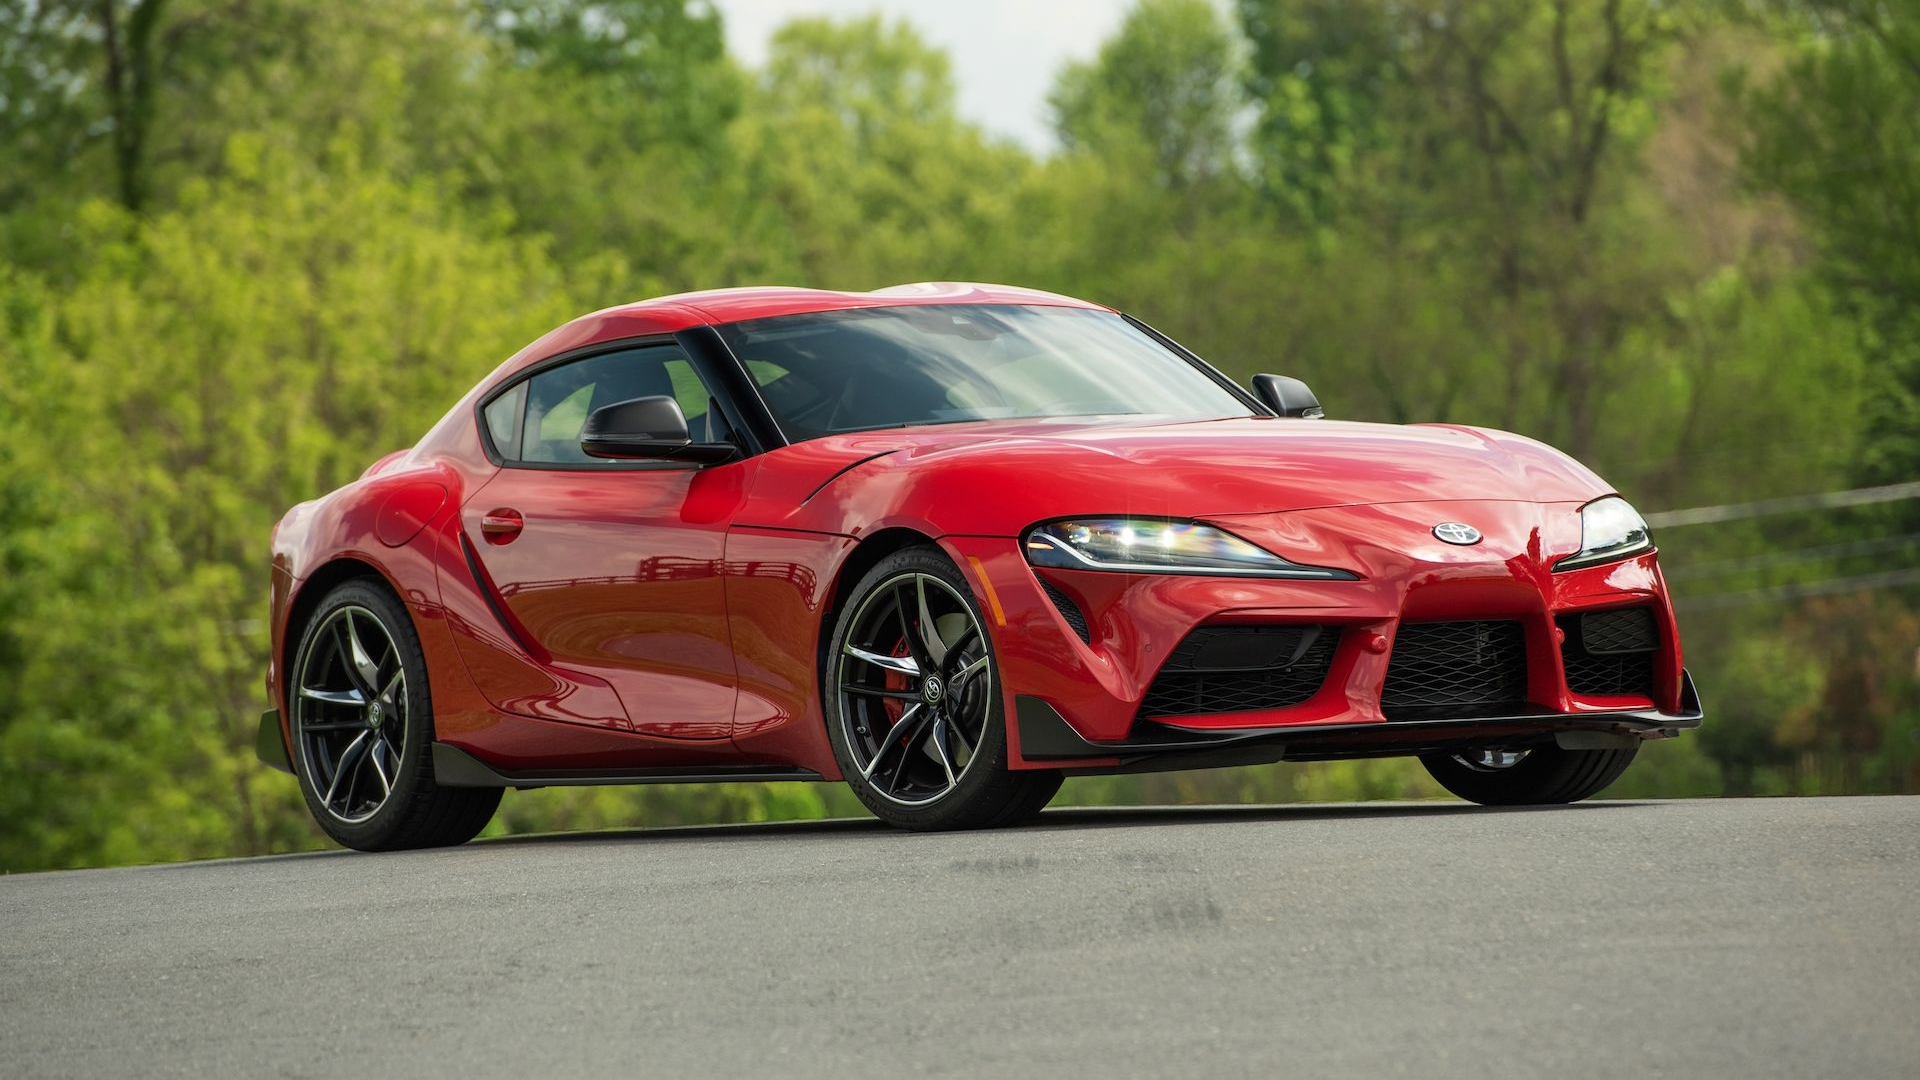 First drive review: 2020 Toyota Supra is fast and frenetic